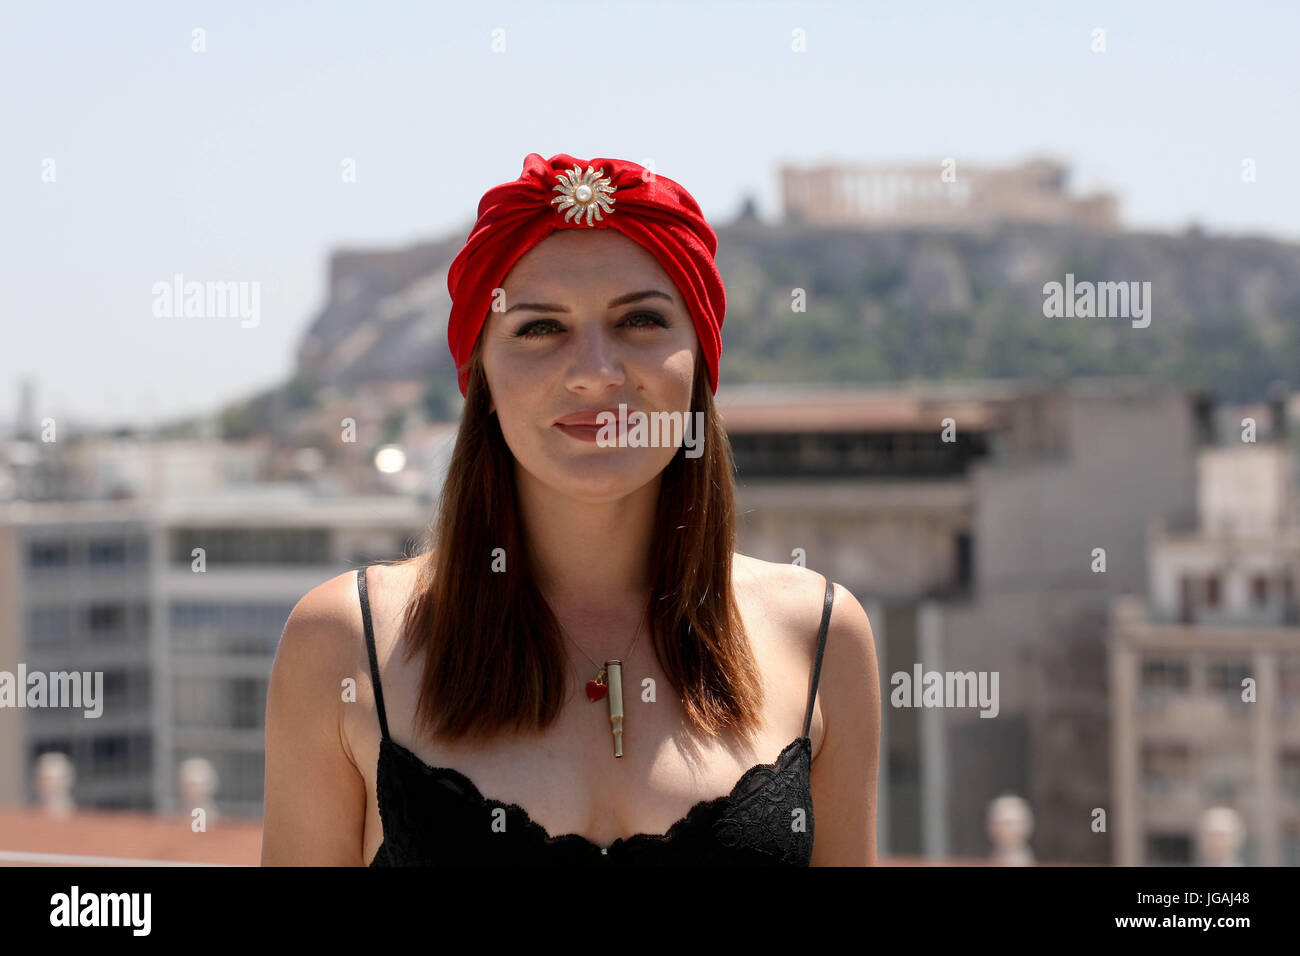 American singer, songwriter, burlesque performer, and comedienne, Ariana Savalas poses with Acropolis at the background. Ariana is on tour with 'Postm Stock Photo